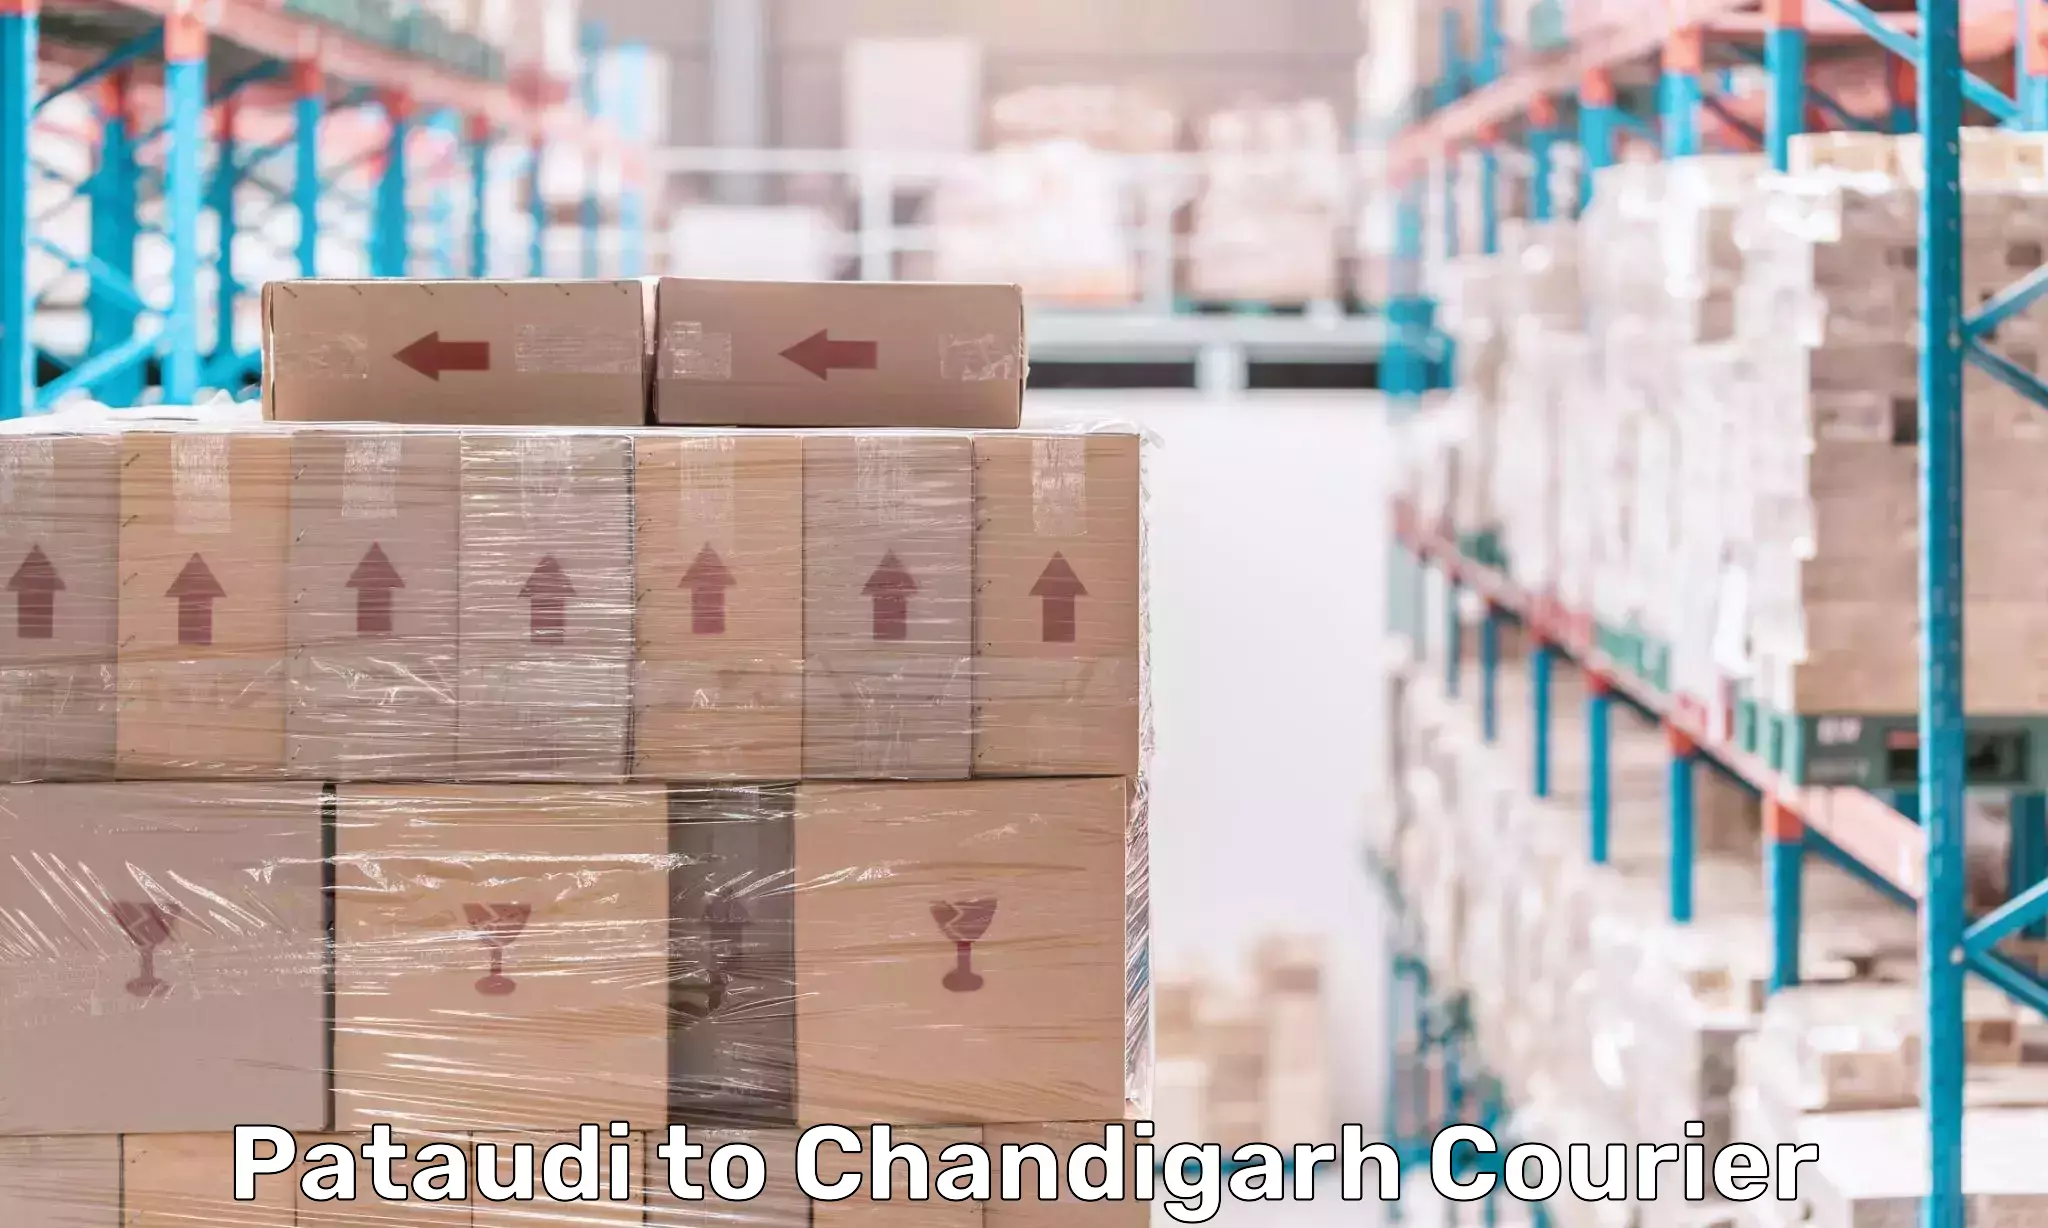 Package delivery network Pataudi to Chandigarh